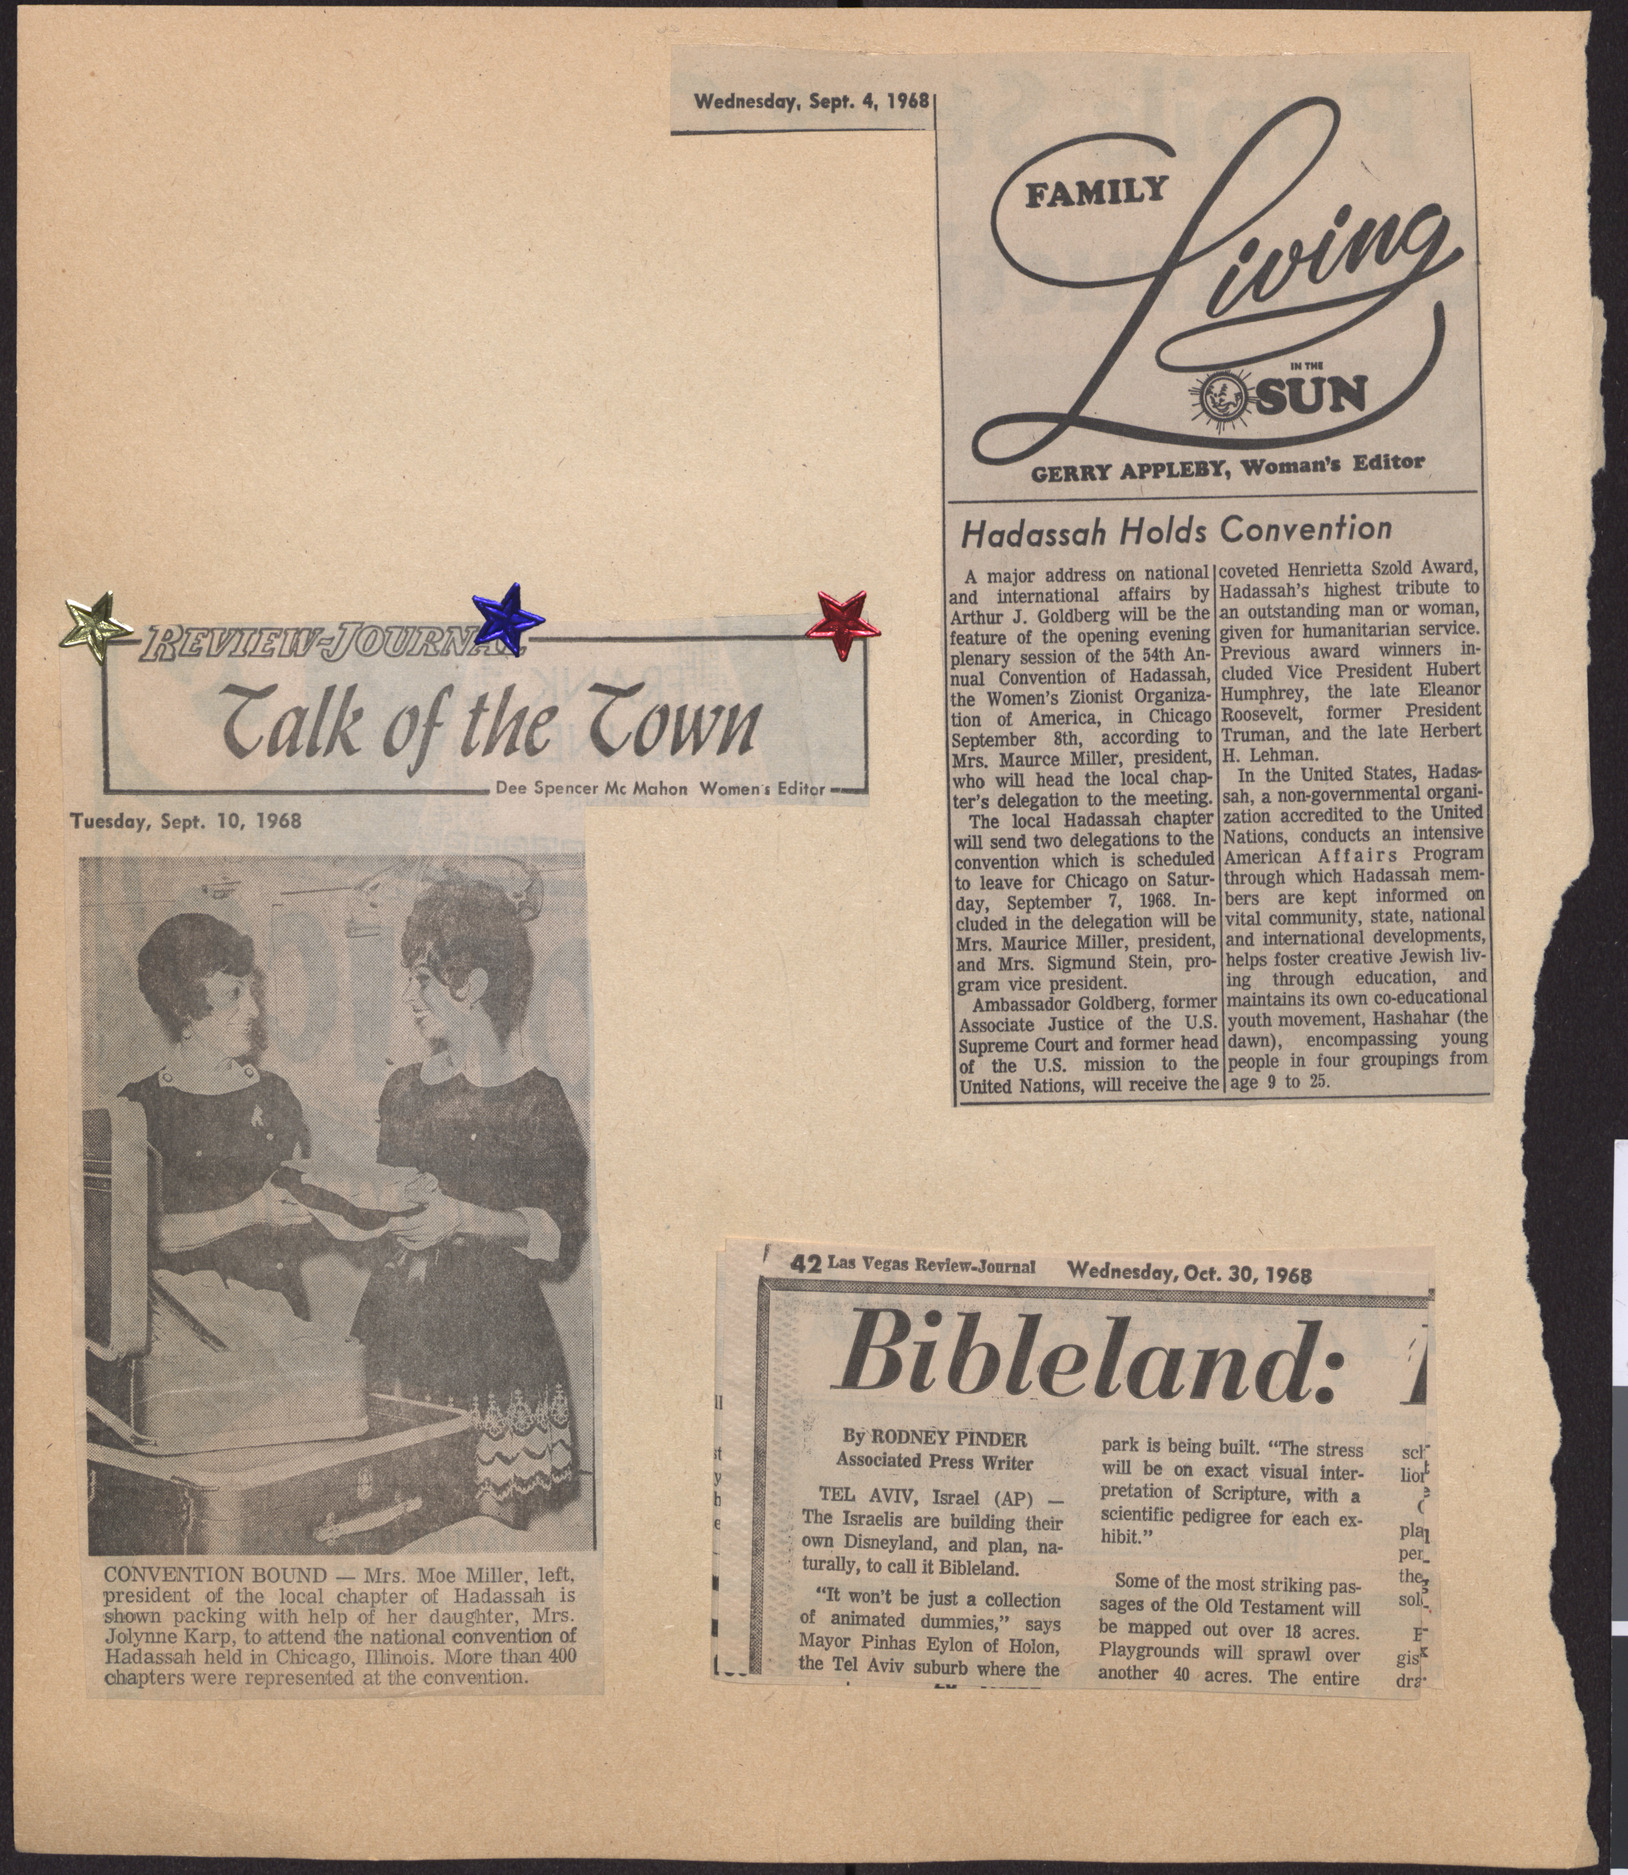 Newspaper clippings, Convention Bound, Las Vegas Review-Journal, September 10, 1968, and Hadassah Holds Convention, September 4, 1968